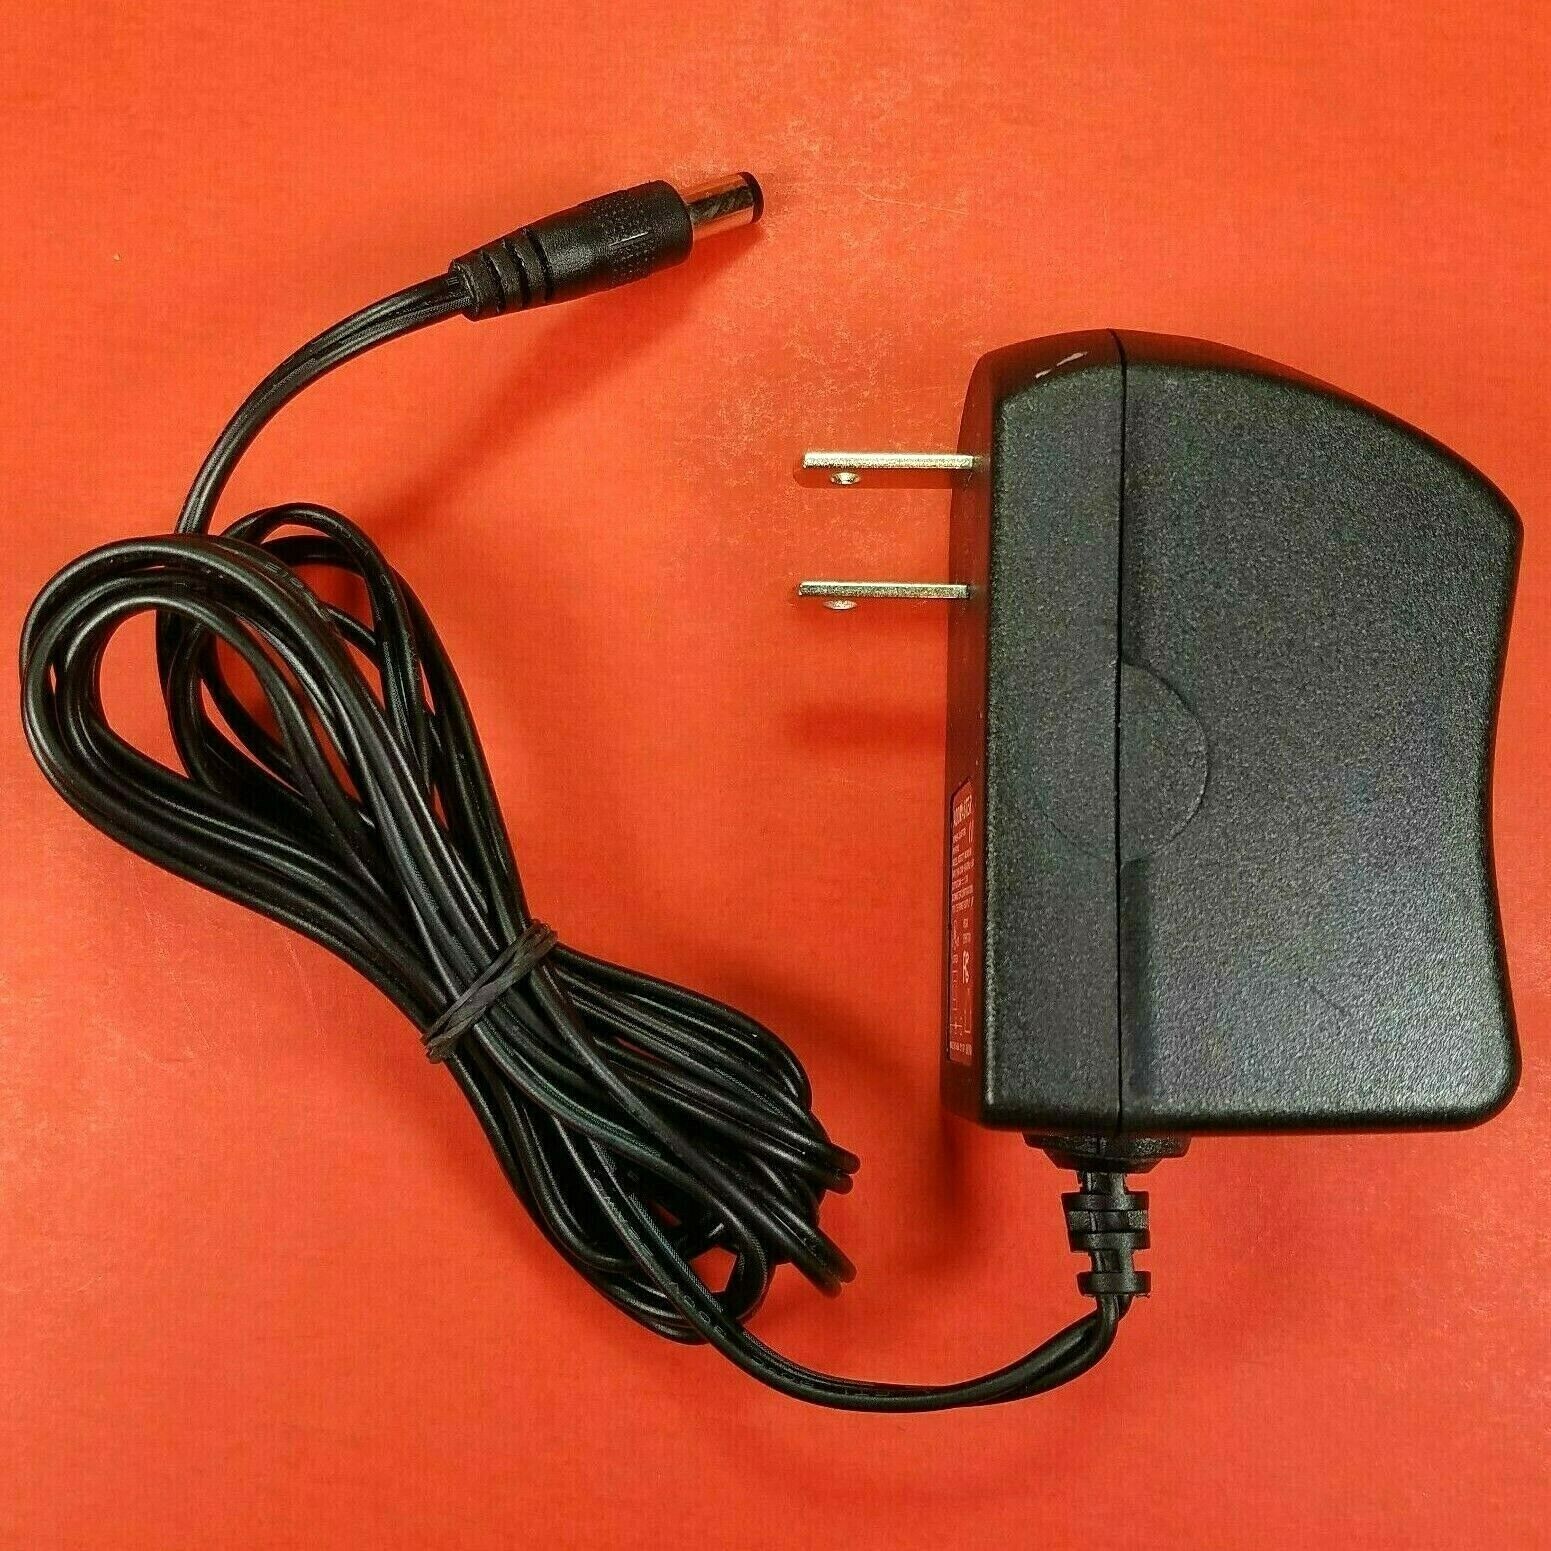 Genuine ADDMASTER IV Power Supply Adaptor 24V - 1A OEM AC/DC Adapter P/N: 96143 Type: AC/DC Adapter Features: Powere